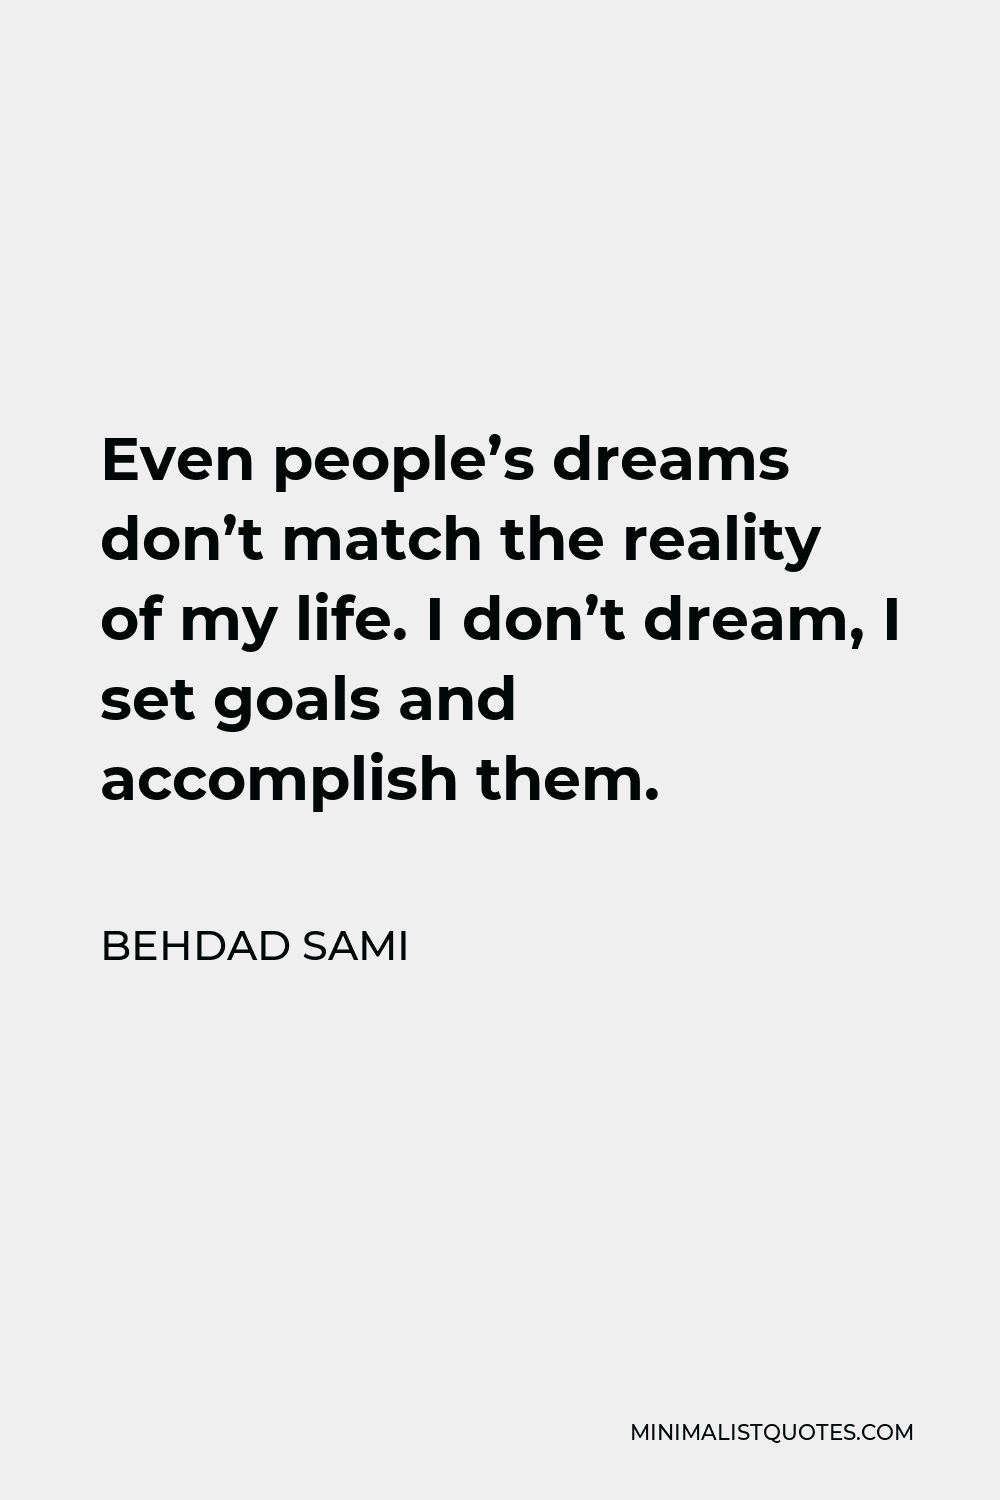 Behdad Sami Quote - Even people’s dreams don’t match the reality of my life. I don’t dream, I set goals and accomplish them.